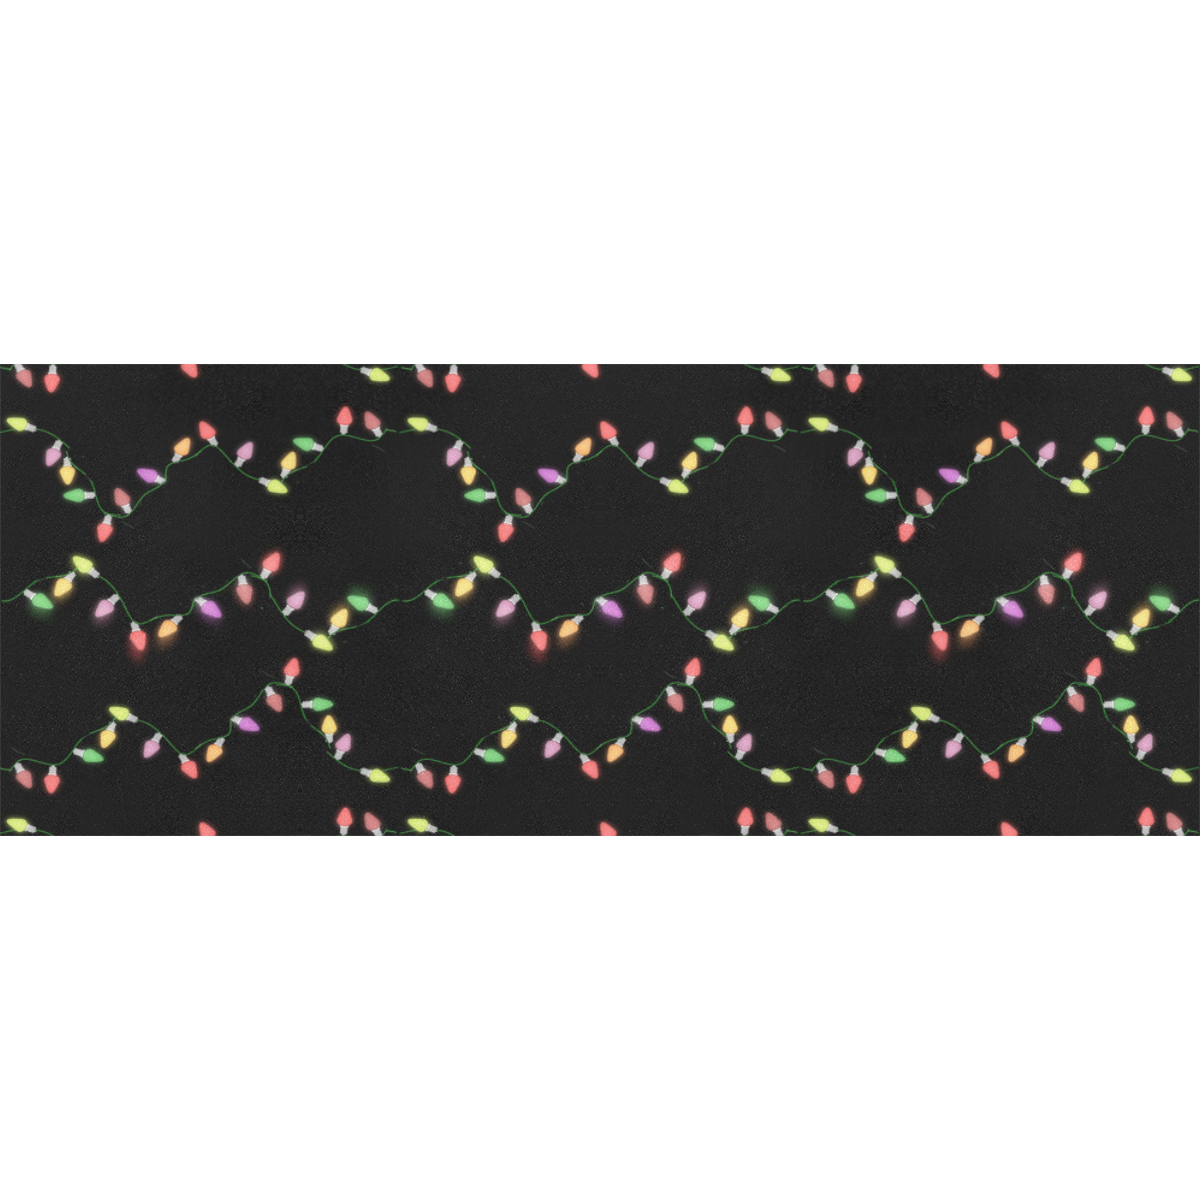 Festive Christmas Lights on Black Gift Wrapping Paper 58"x 23" (1 Roll)